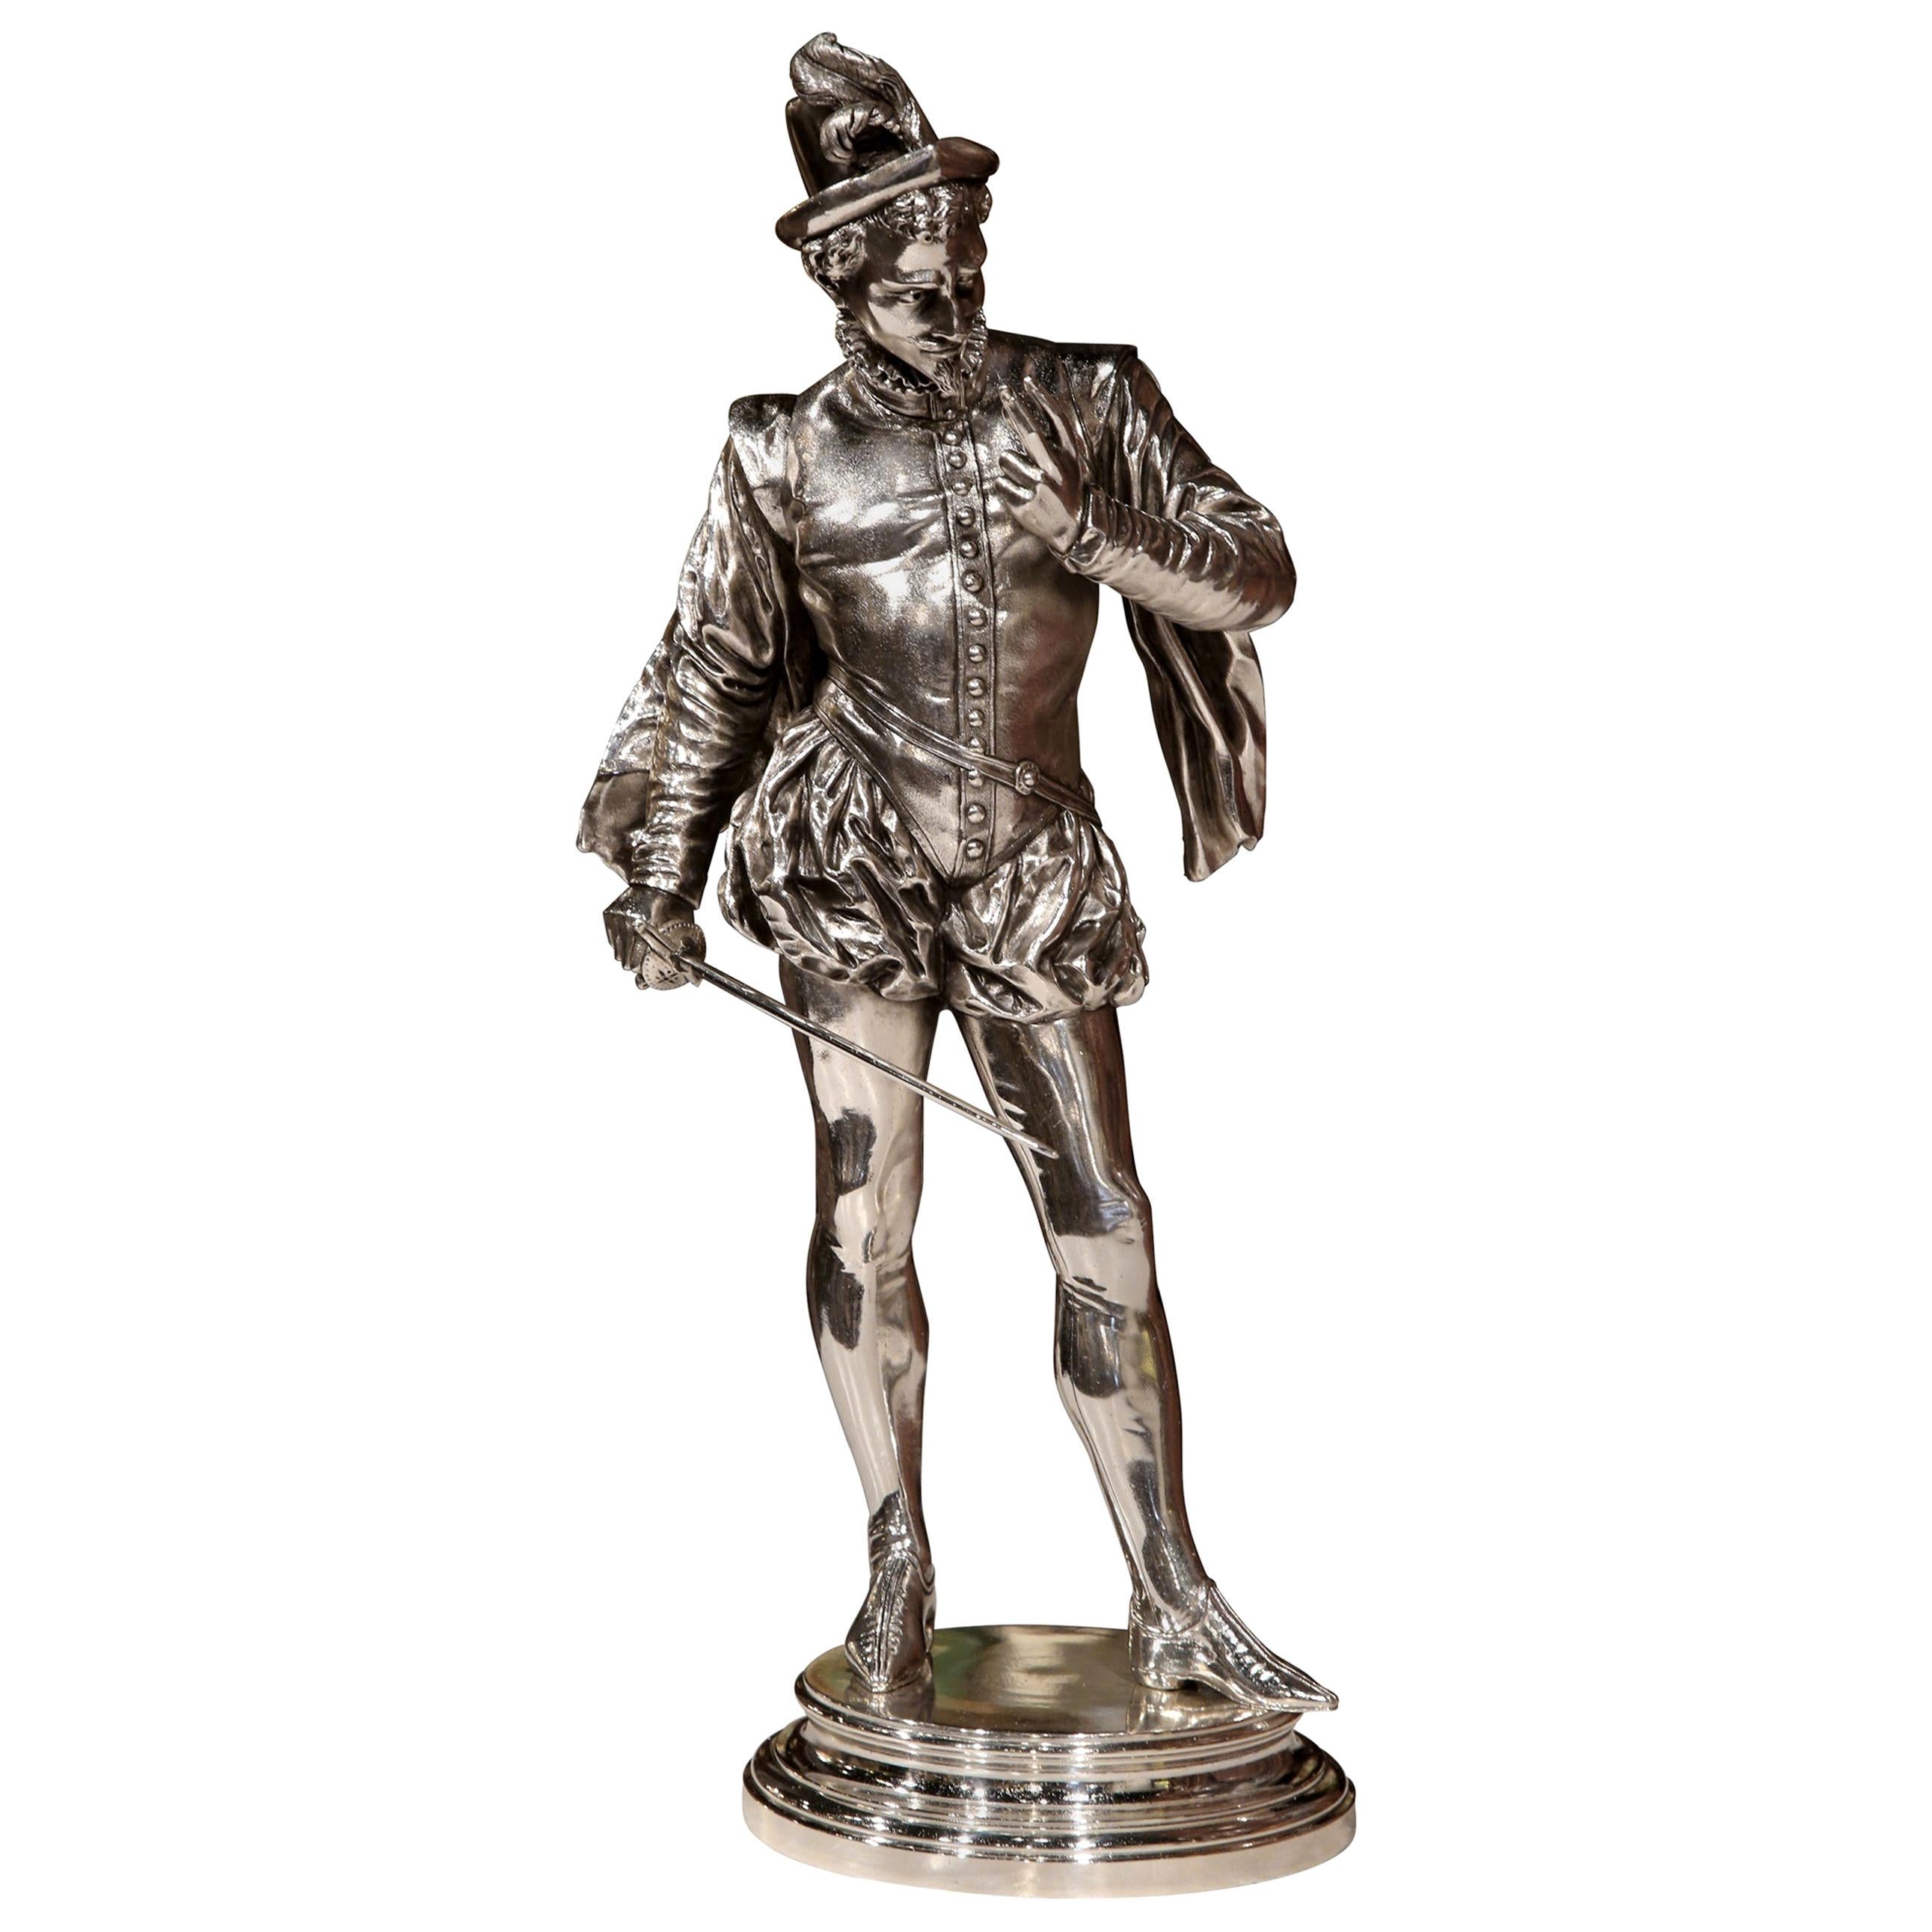 19th Century French Silvered Bronze Sculpture "Le Duel" Signed P.L. Detrier For Sale